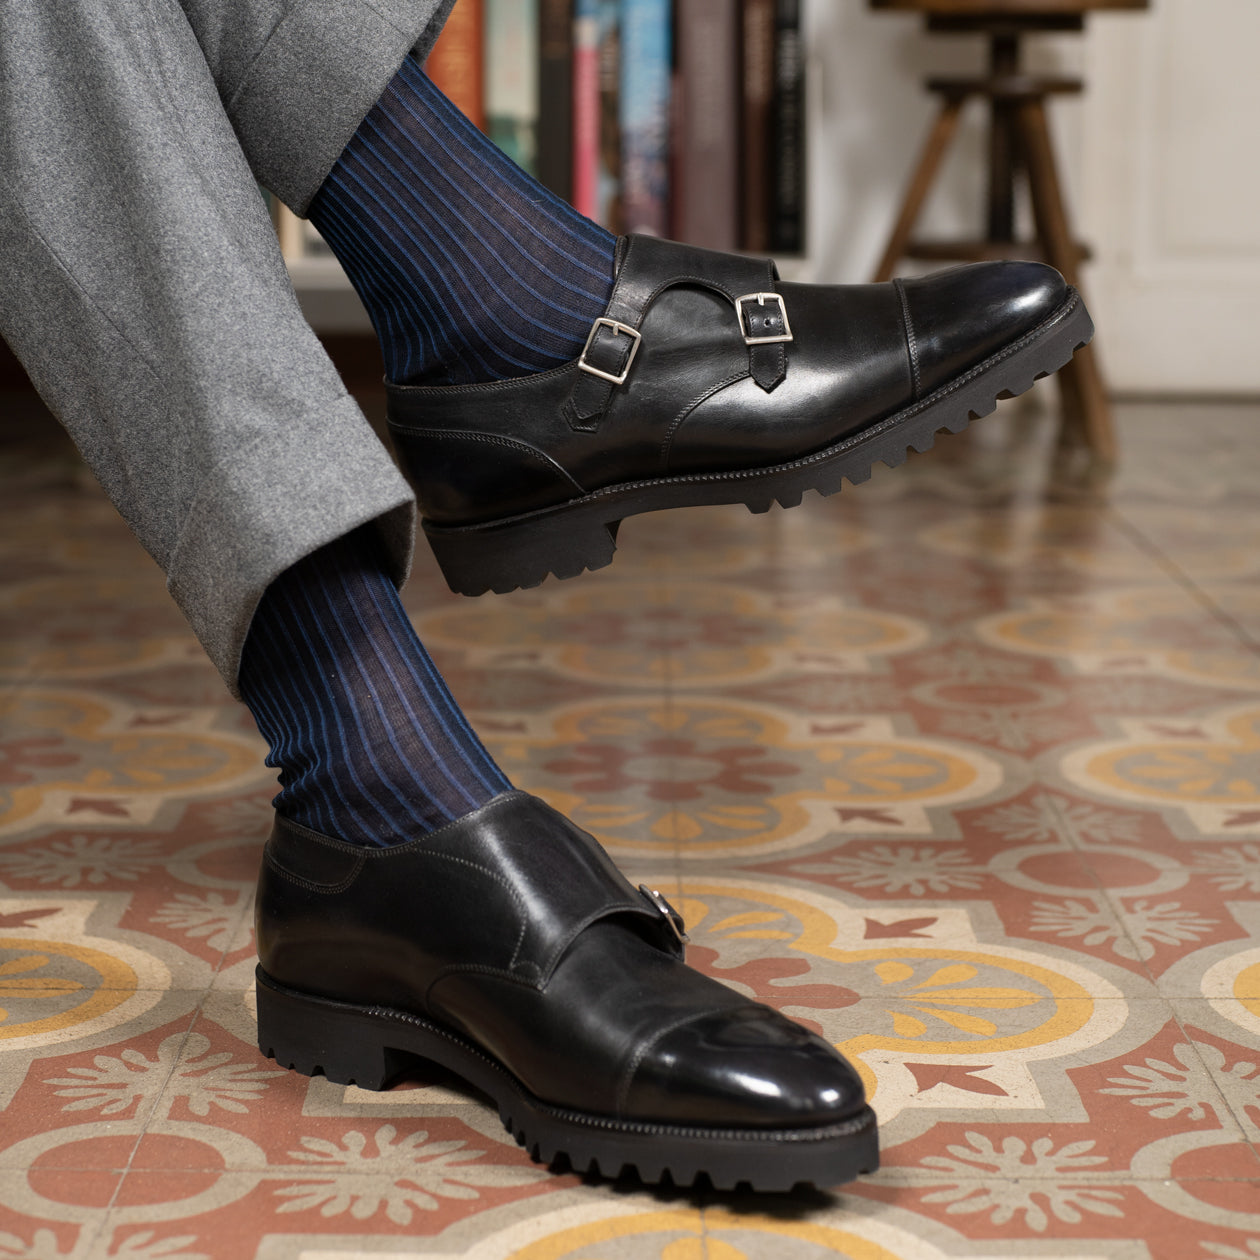 Joseph Double Monk Shoe by Norman Vilalta Goodyear-welted monk straps shoes in Barcelona, Spain